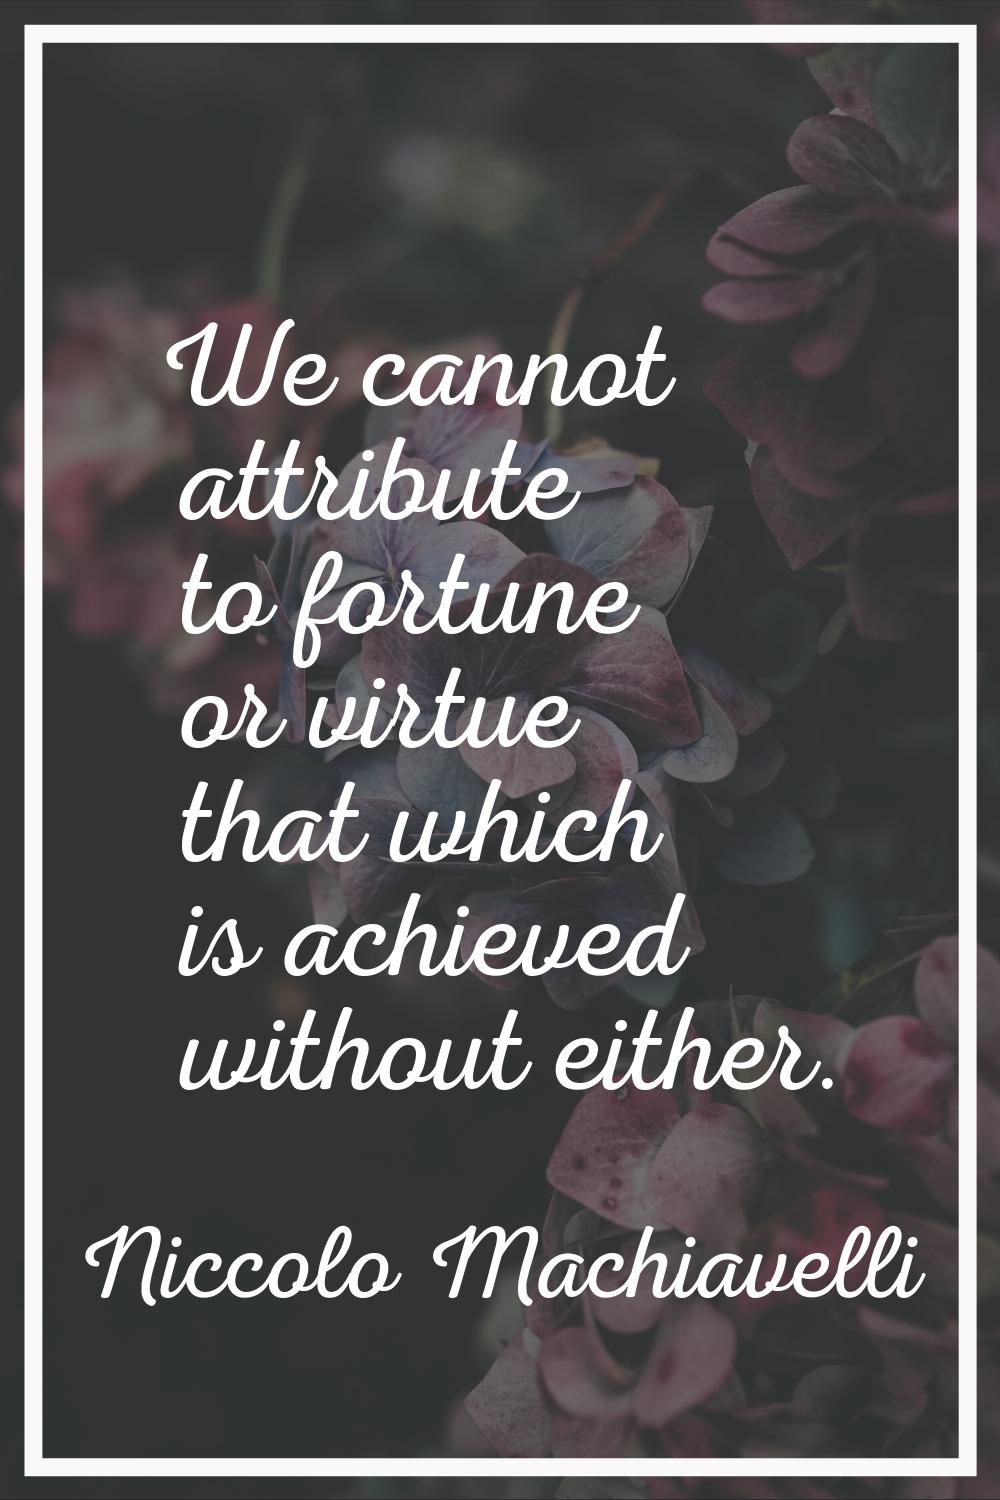 We cannot attribute to fortune or virtue that which is achieved without either.